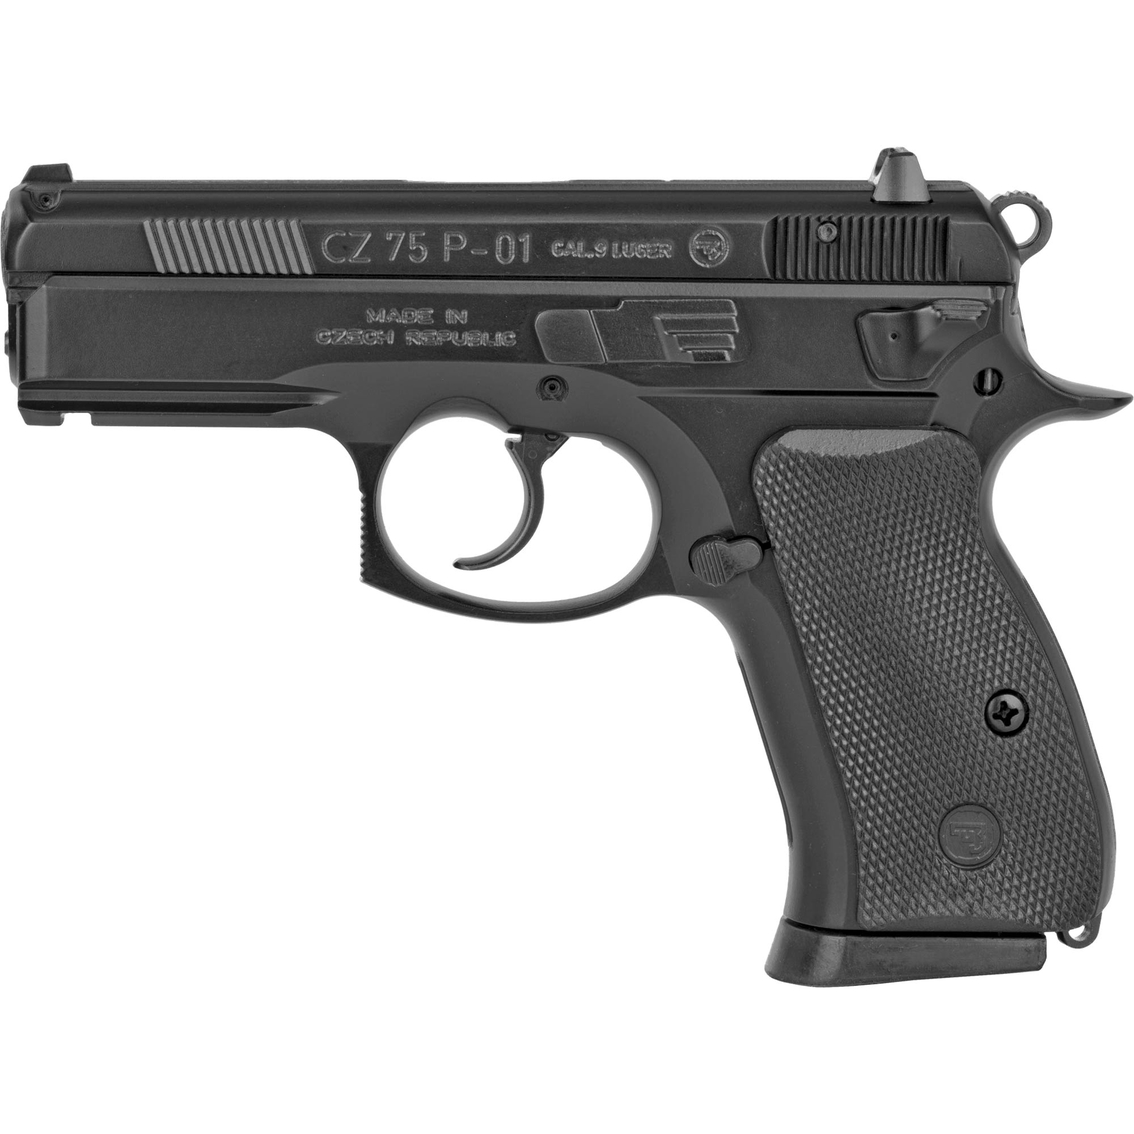 CZ 75 P-01 9MM 3.75 in. Barrel 14 Rds 2-Mags Pistol Black - Image 2 of 3